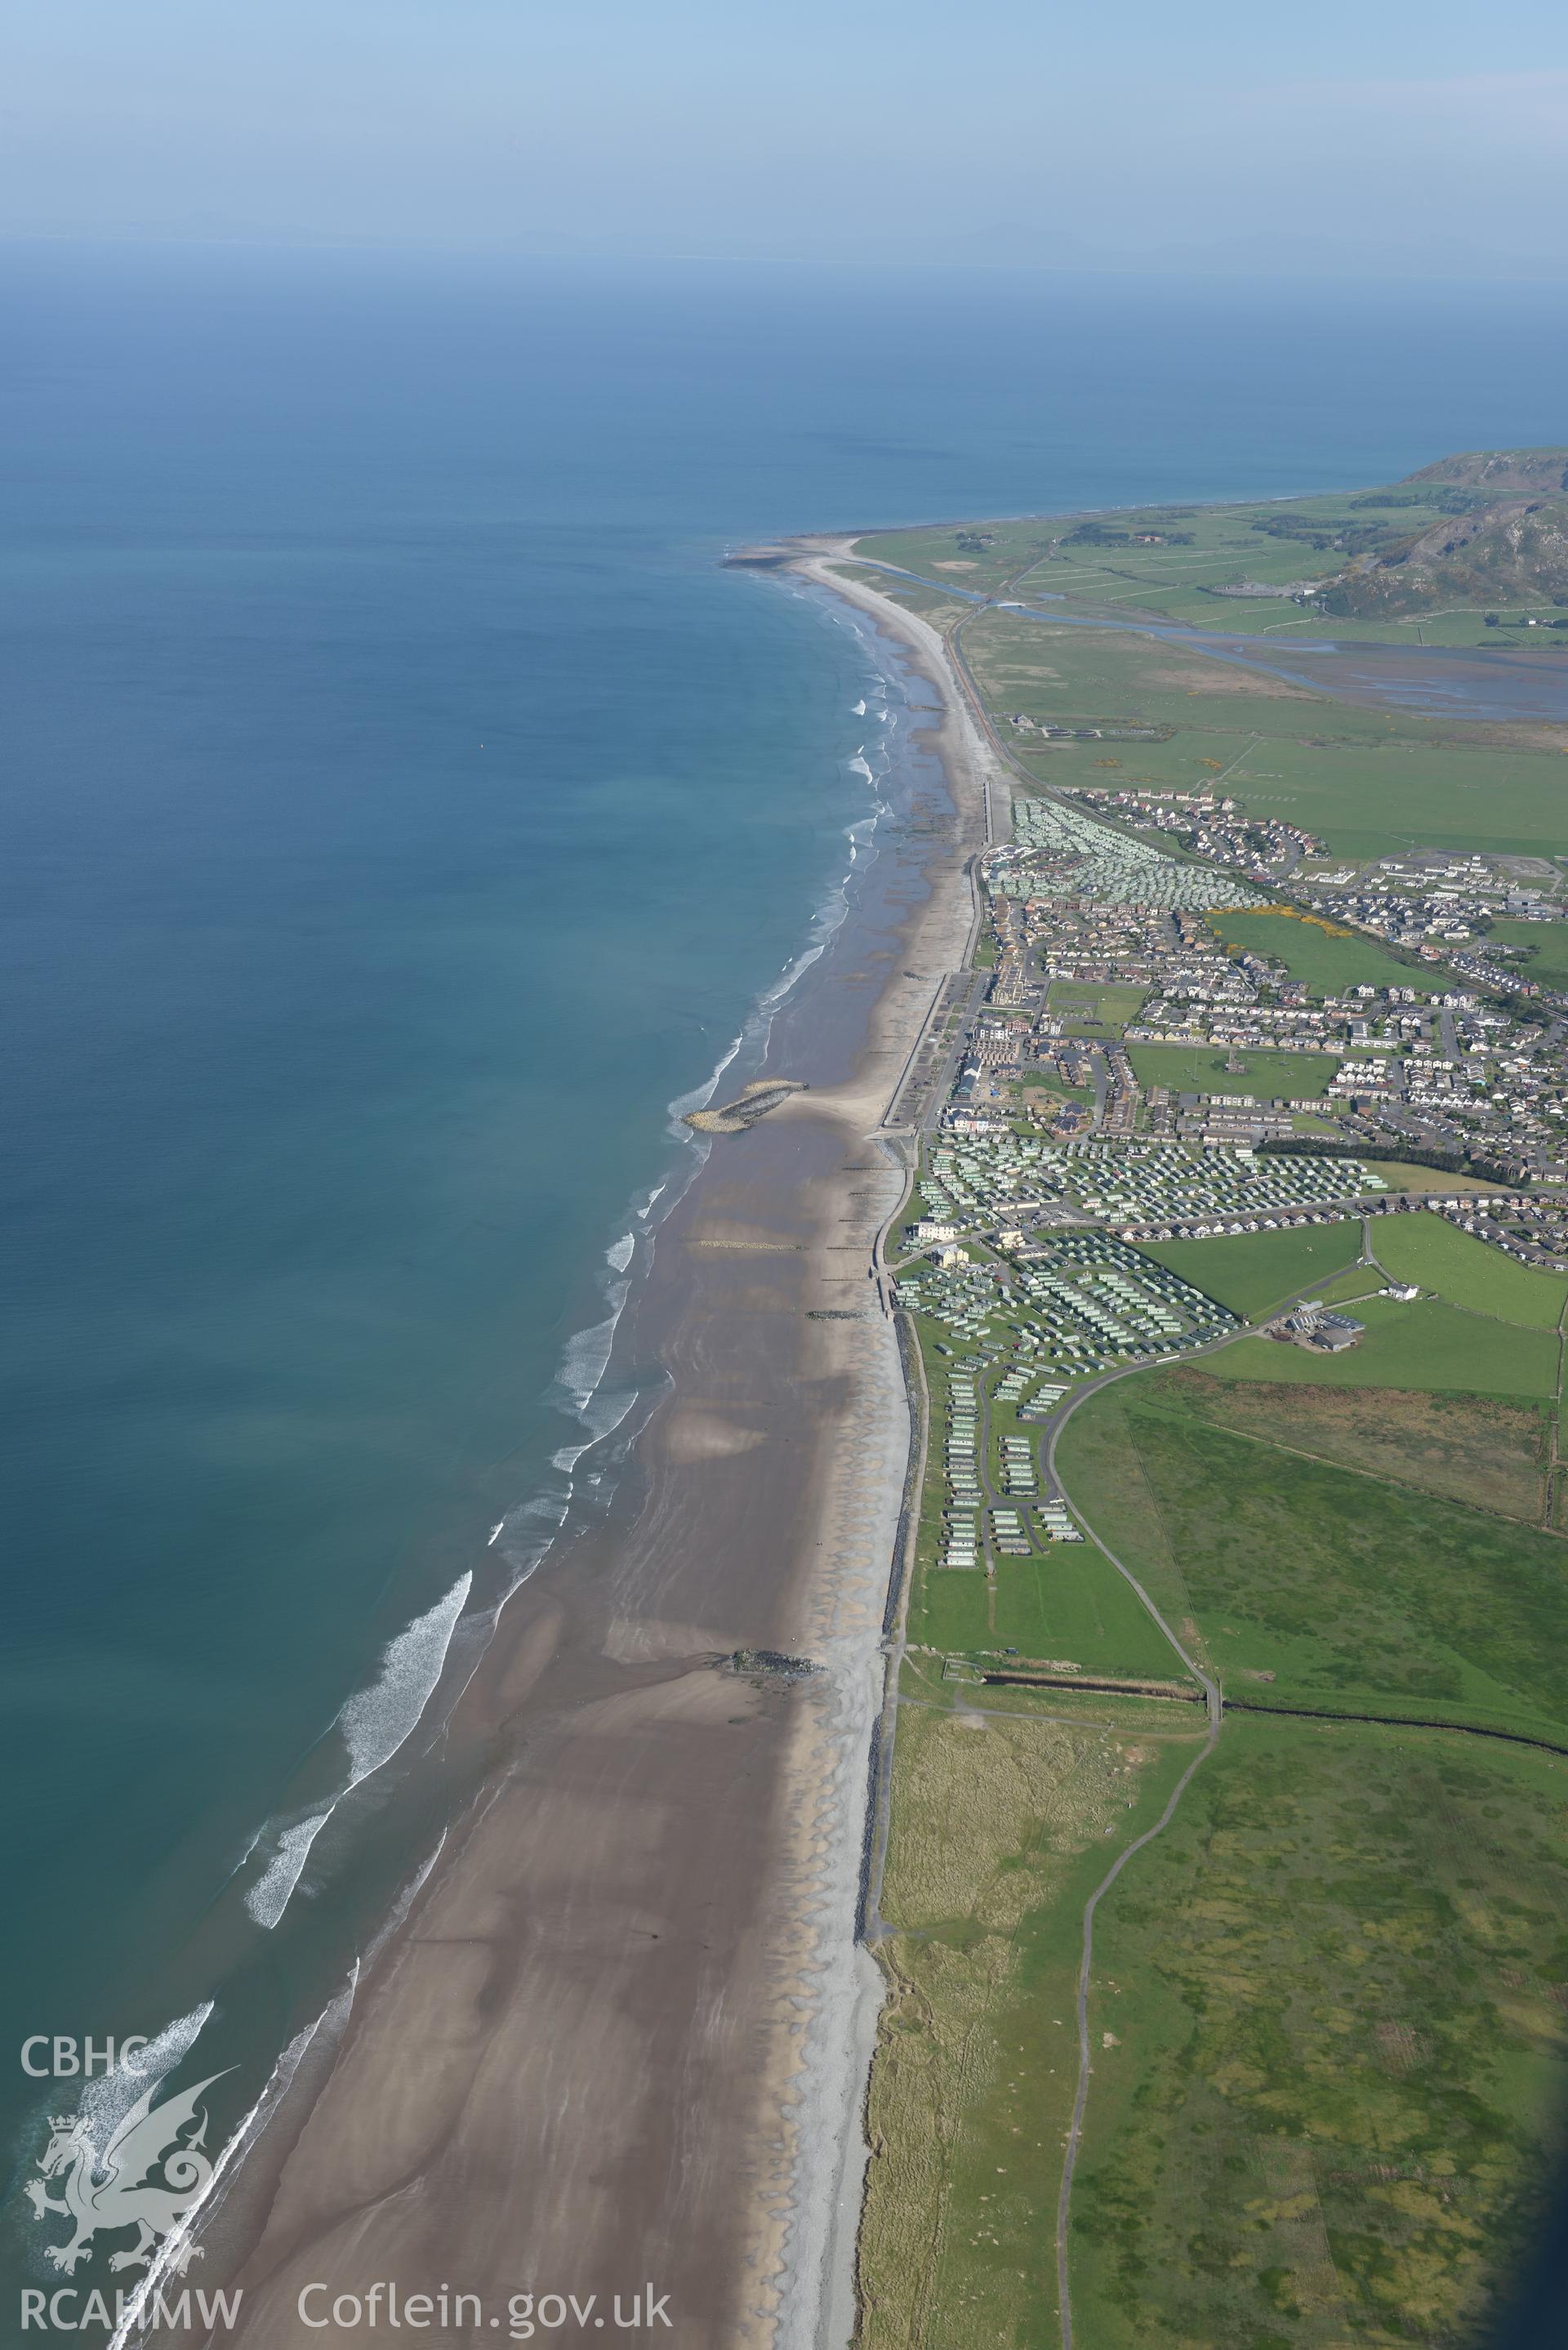 Aerial photography of Tywyn taken on 3rd May 2017.  Baseline aerial reconnaissance survey for the CHERISH Project. ? Crown: CHERISH PROJECT 2017. Produced with EU funds through the Ireland Wales Co-operation Programme 2014-2020. All material made freely available through the Open Government Licence.